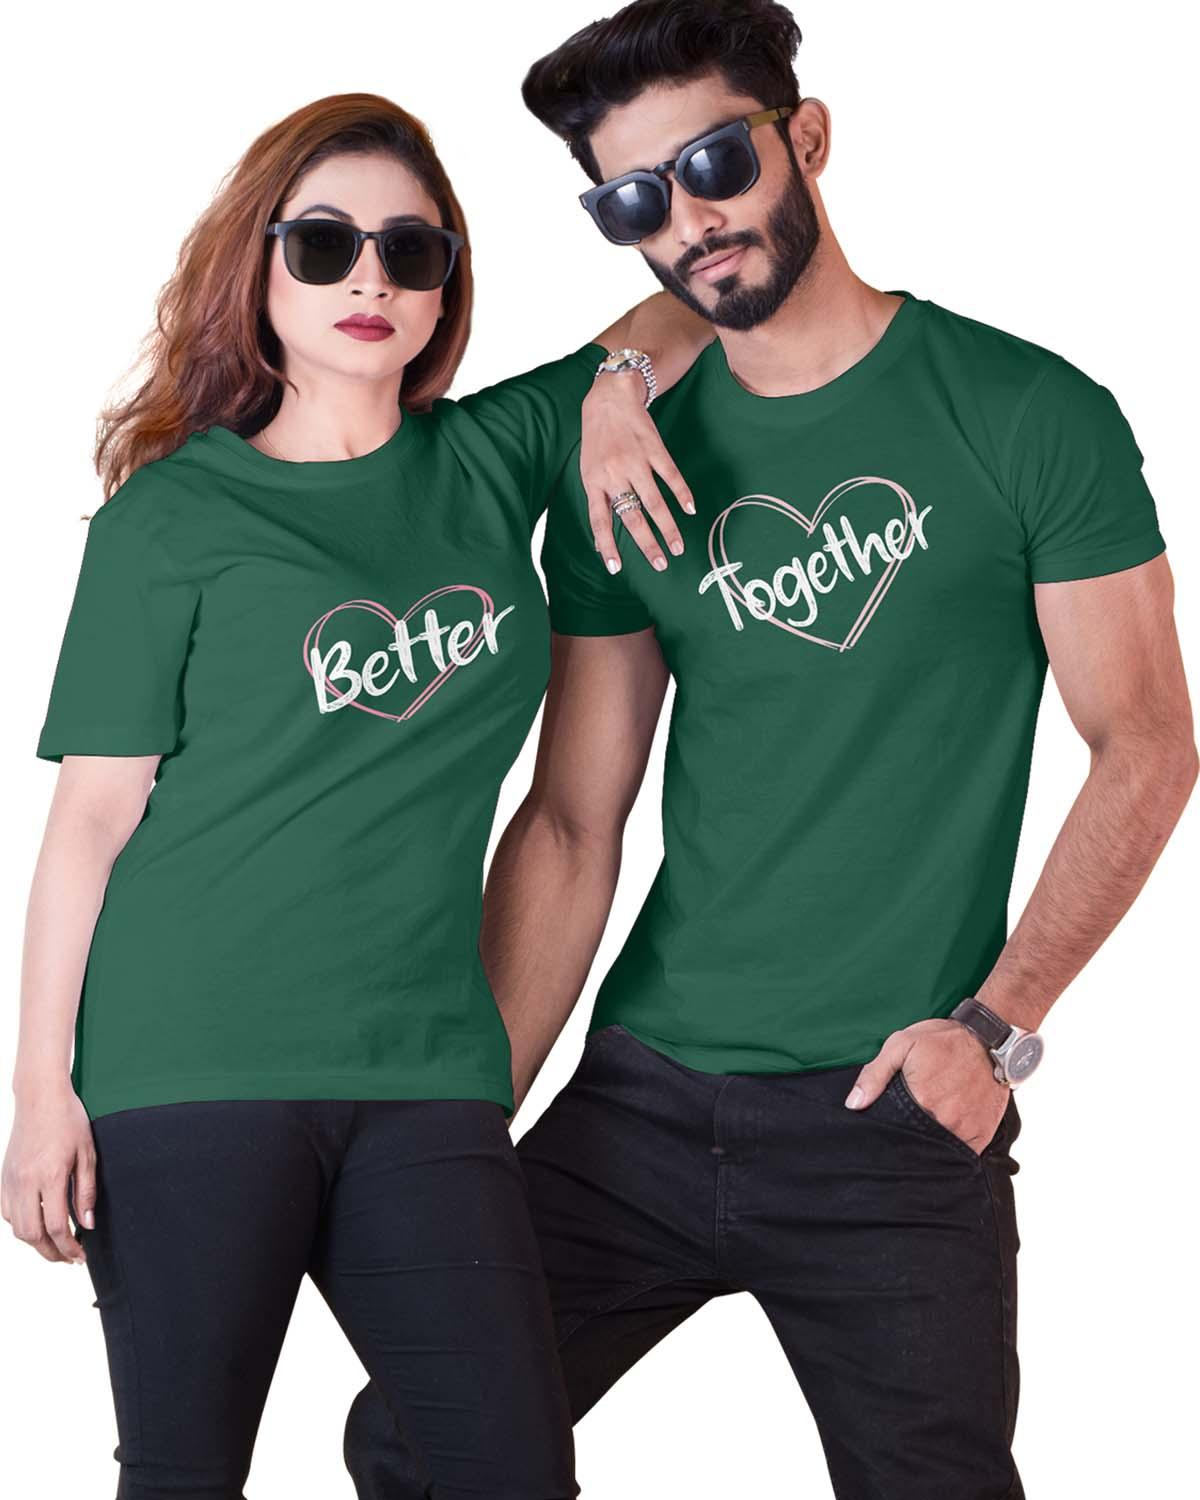 Better Together Couple T-Shirt - Dudeme